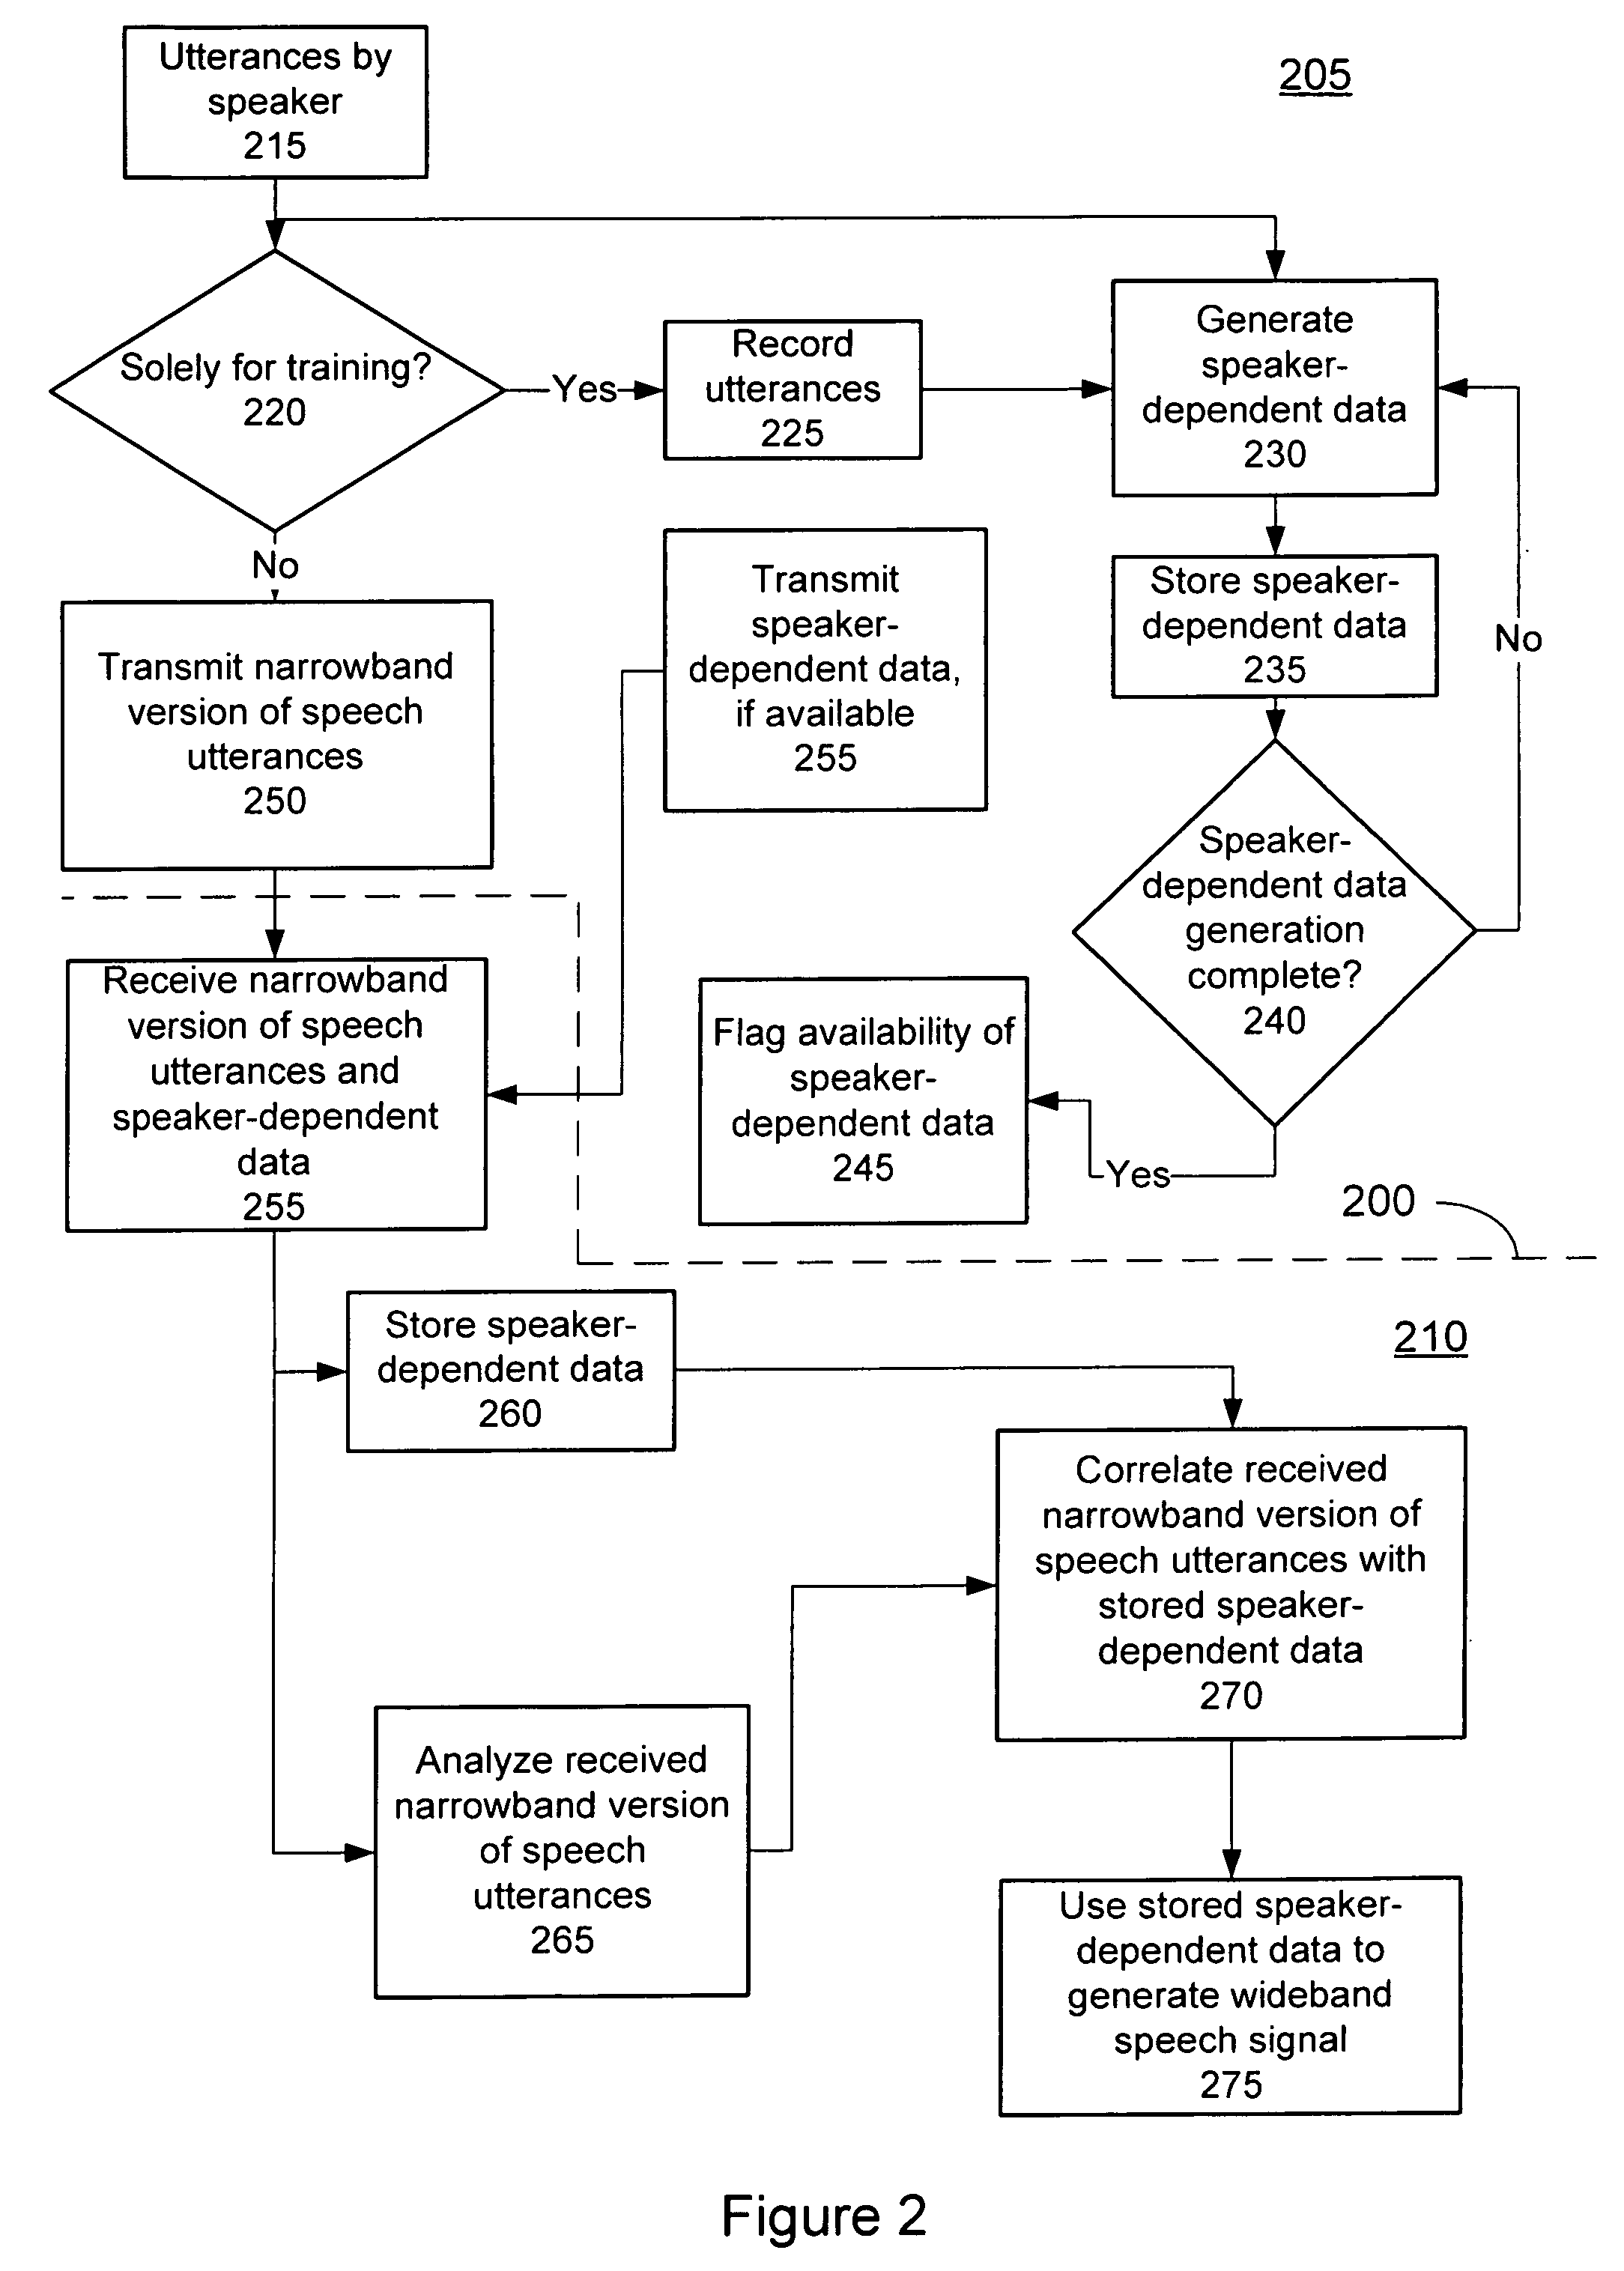 System for generating a wideband signal from a narrowband signal using transmitted speaker-dependent data